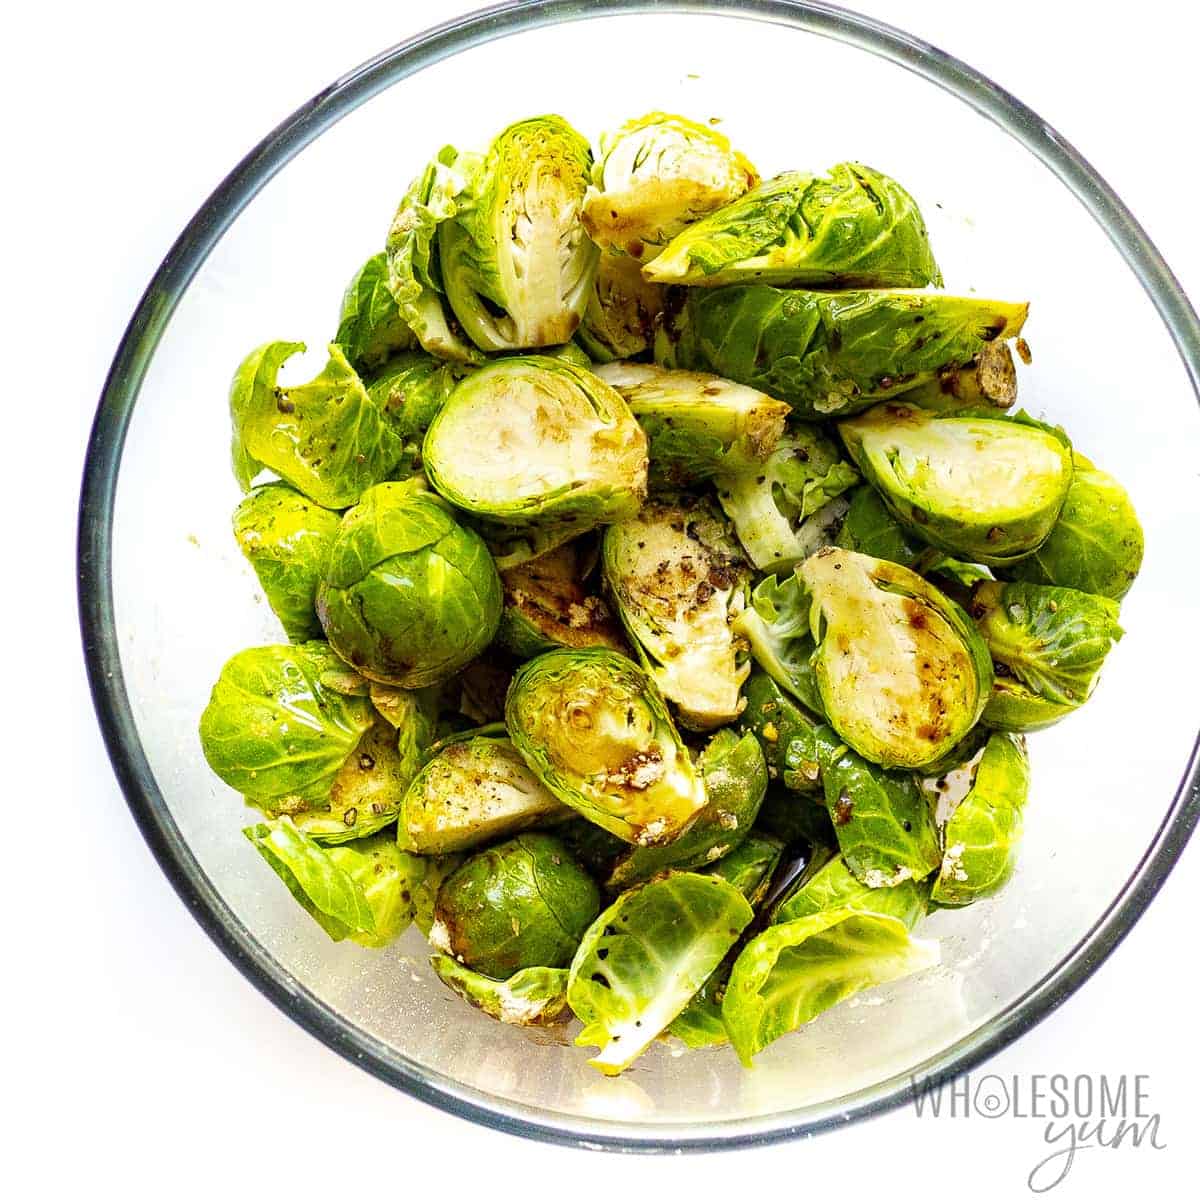 Seasoned brussels sprouts in a bowl